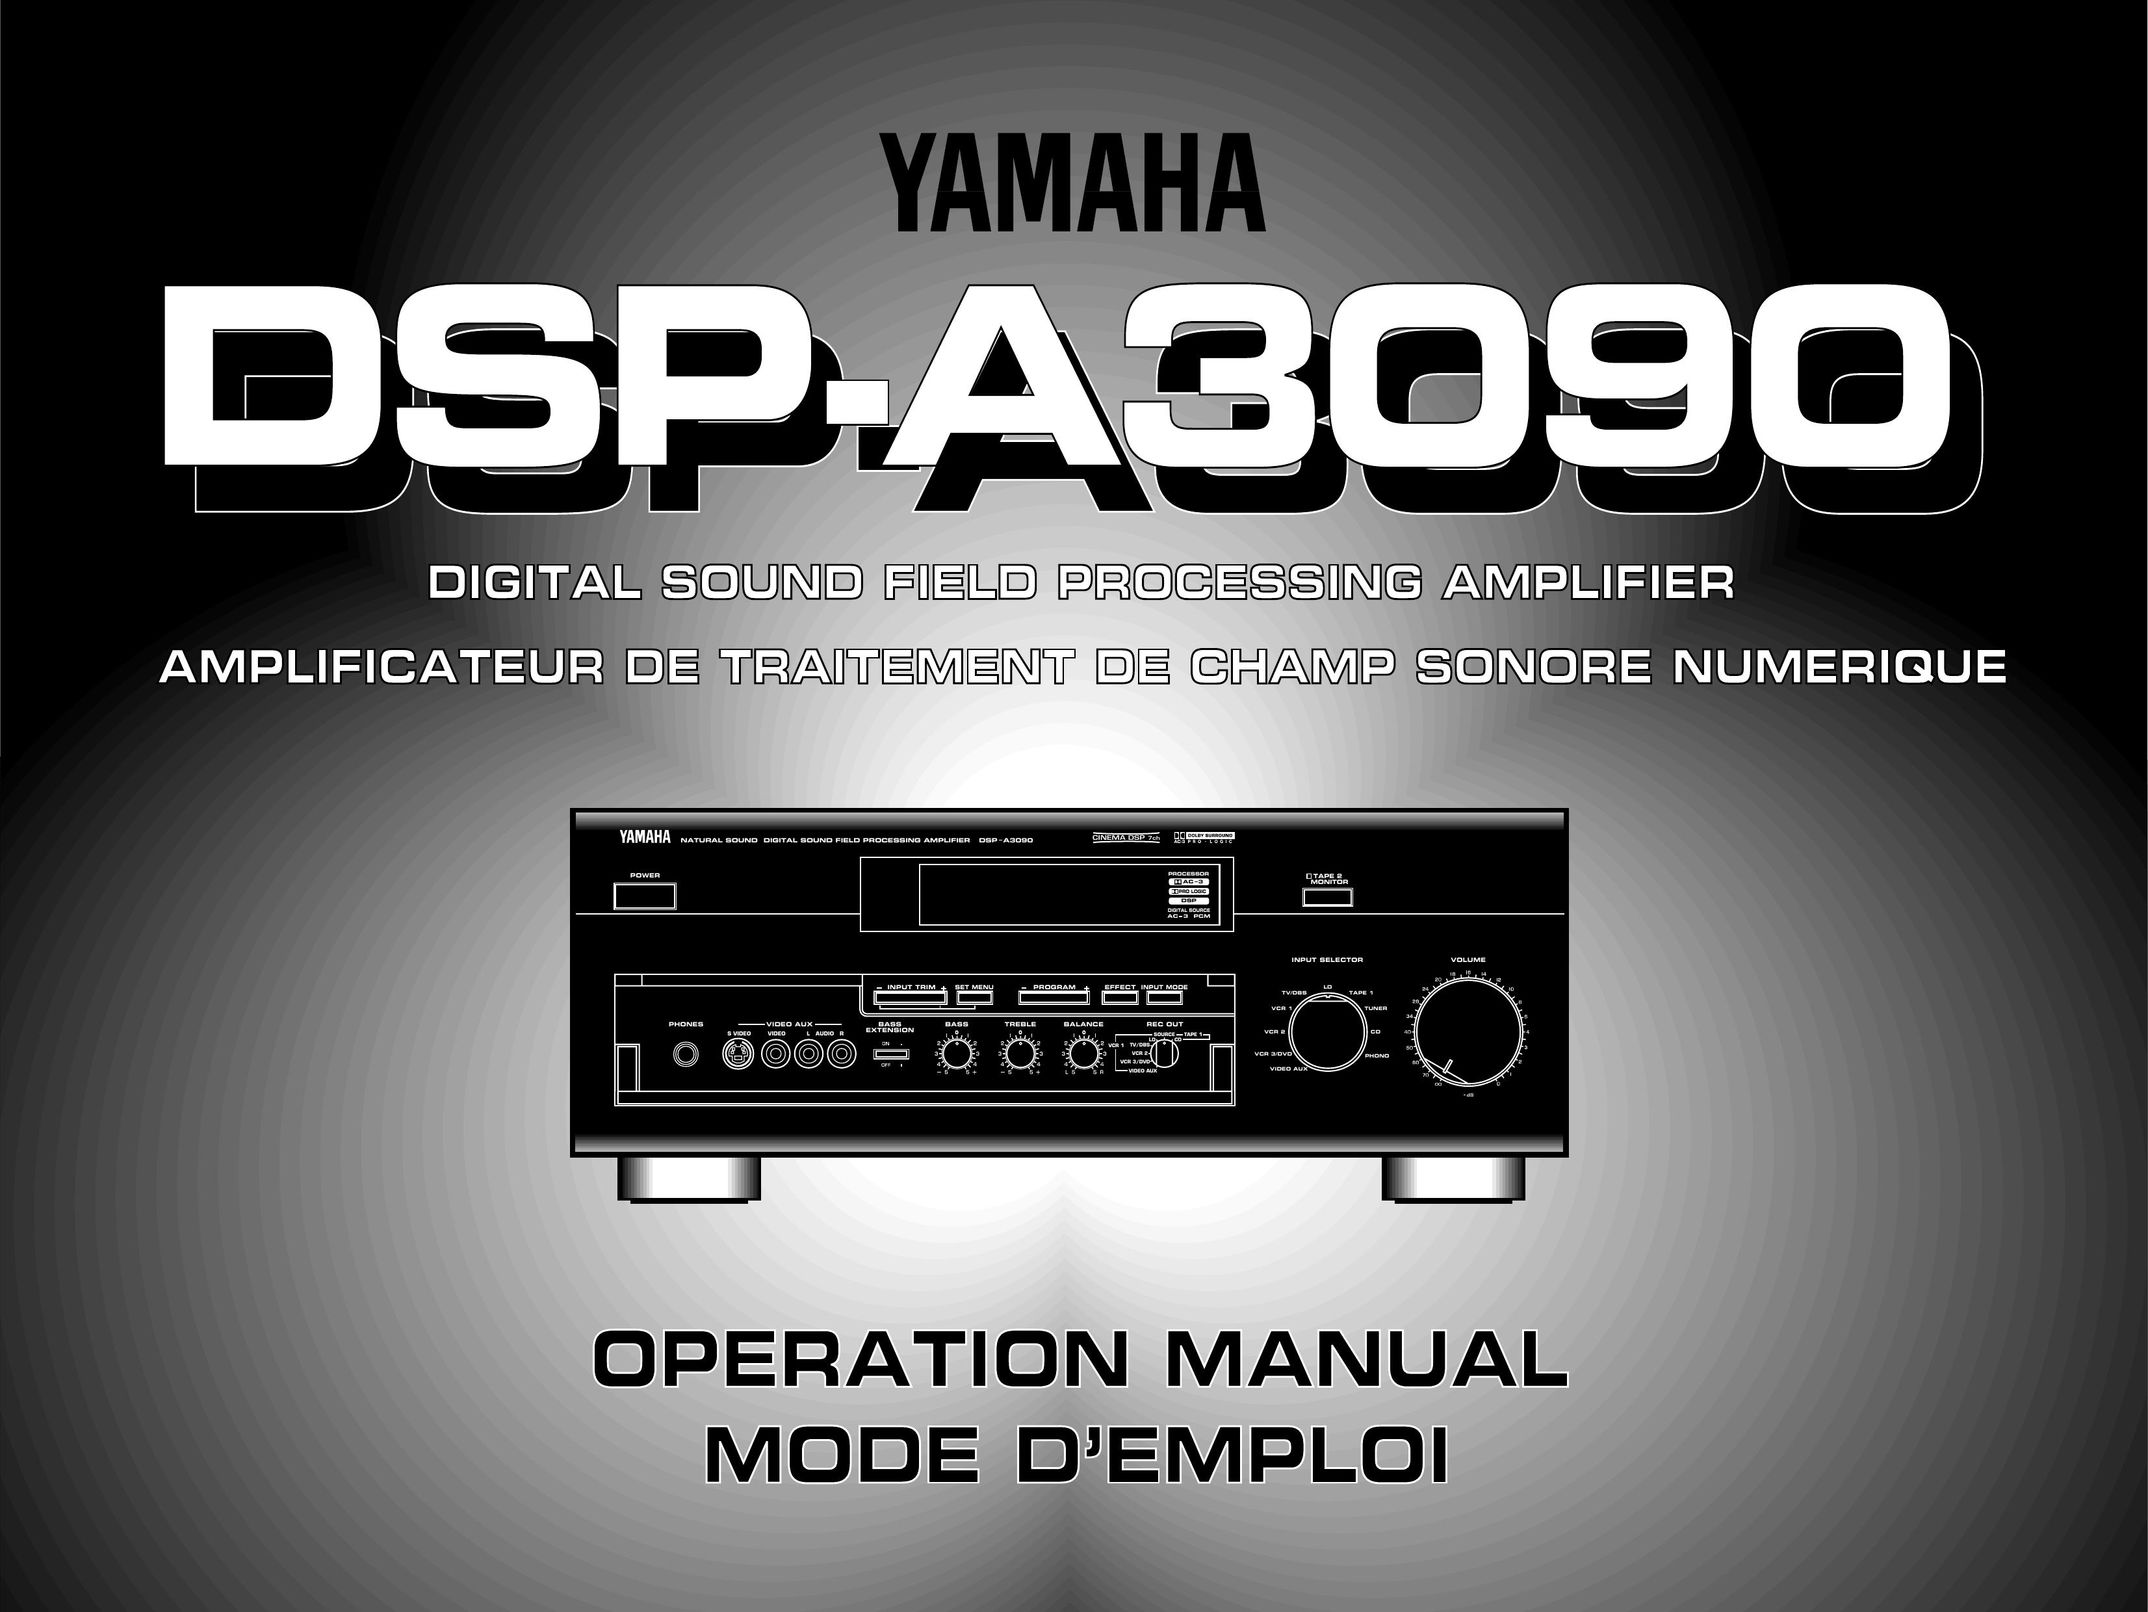 Yamaha DSP-A3090 Stereo System User Manual